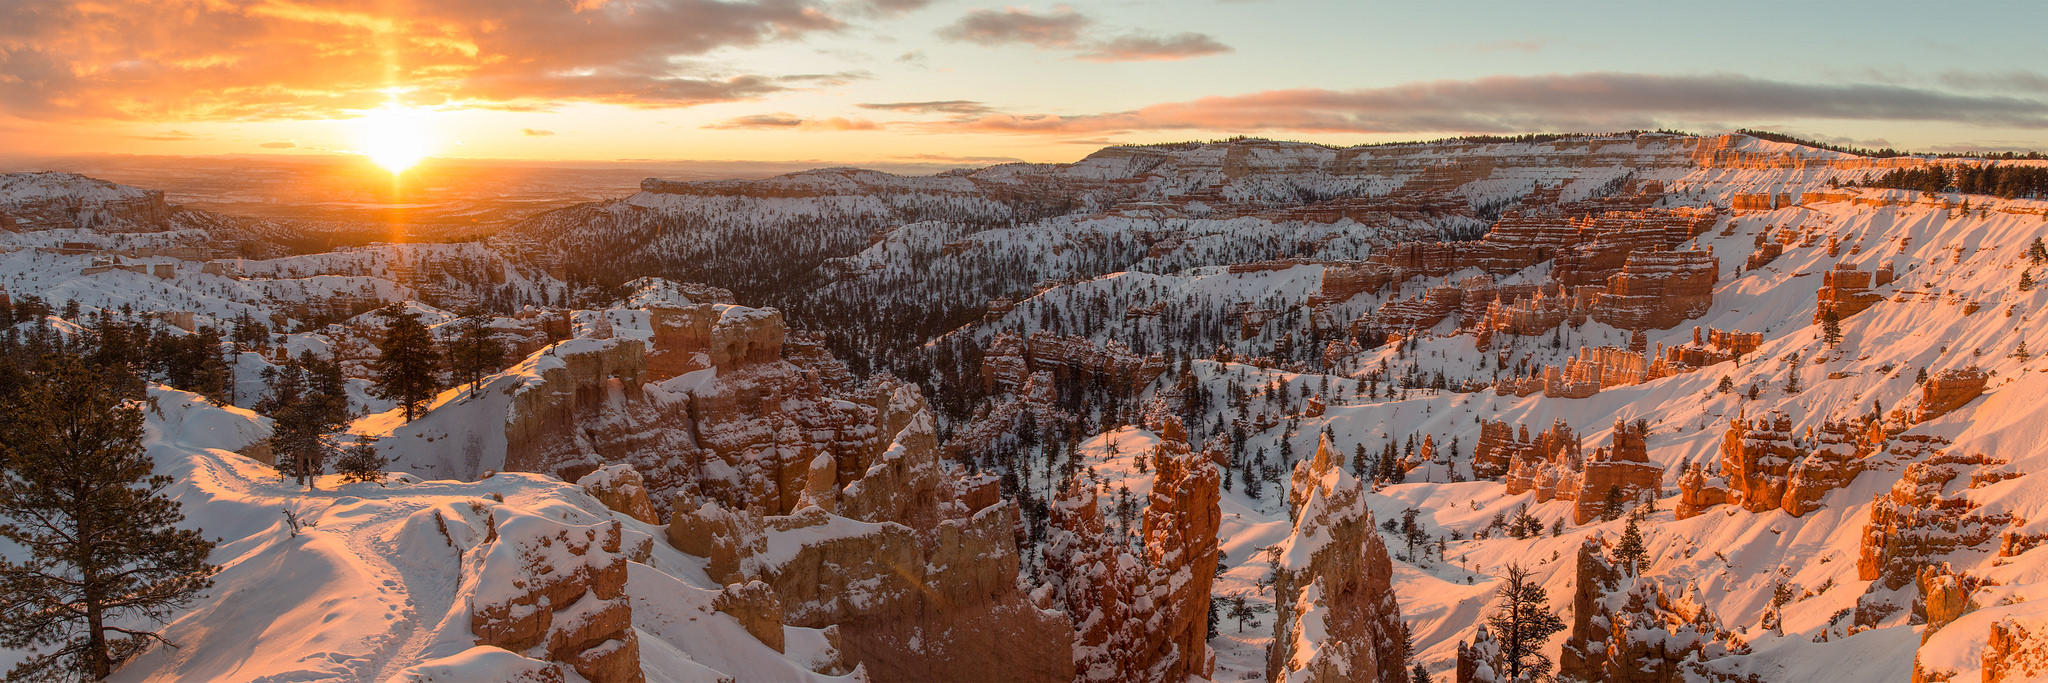 This panoramic view of Bryce Canyon at sunrise proves the park is at least as beautiful in winter as it is in summer. Photo by Wenjie Qiao via Flickr.